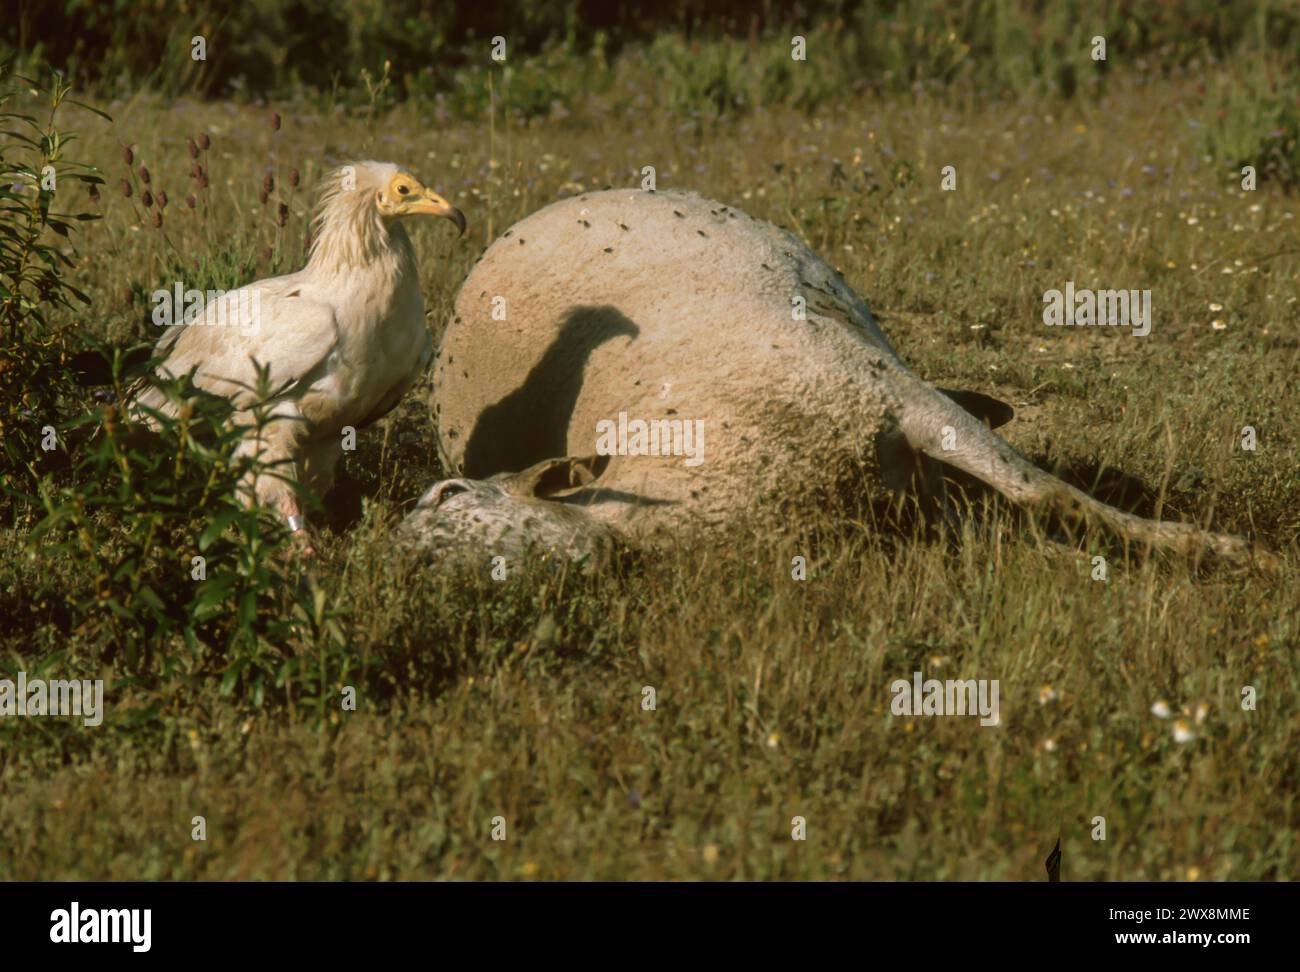 Eating Egyptian Vulture (Neophron percnopterus) next to cow Stock Photo